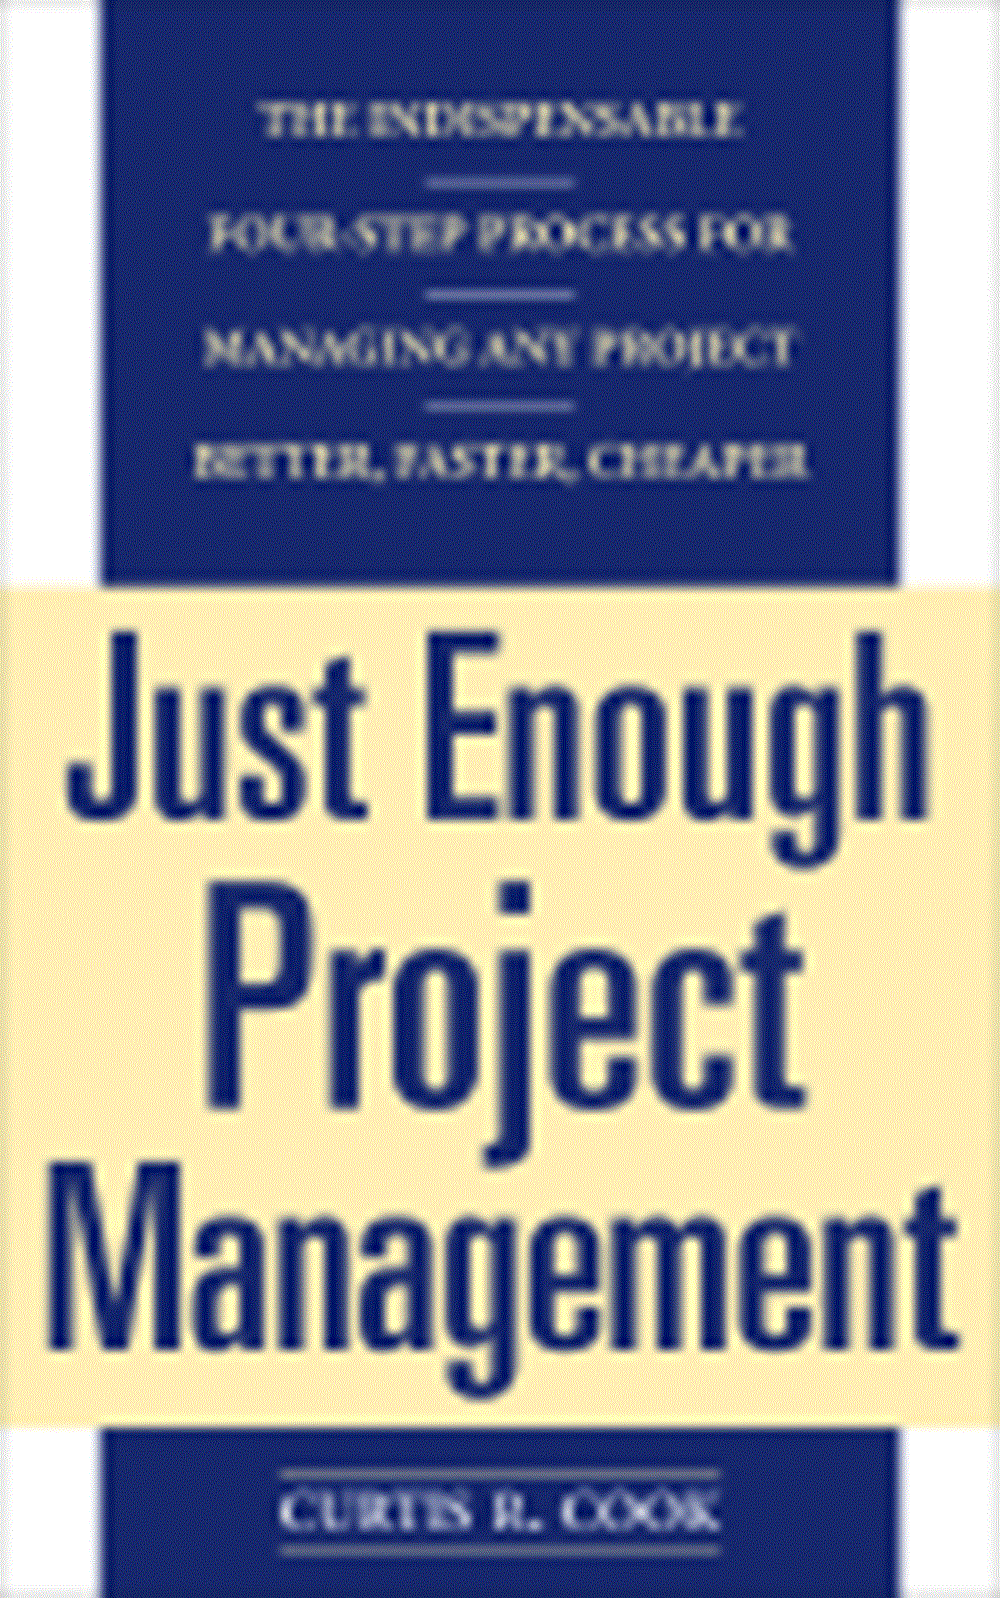 Just Enough Project Management The Indispensable Four-Step Process for Managing Any Project, Better,